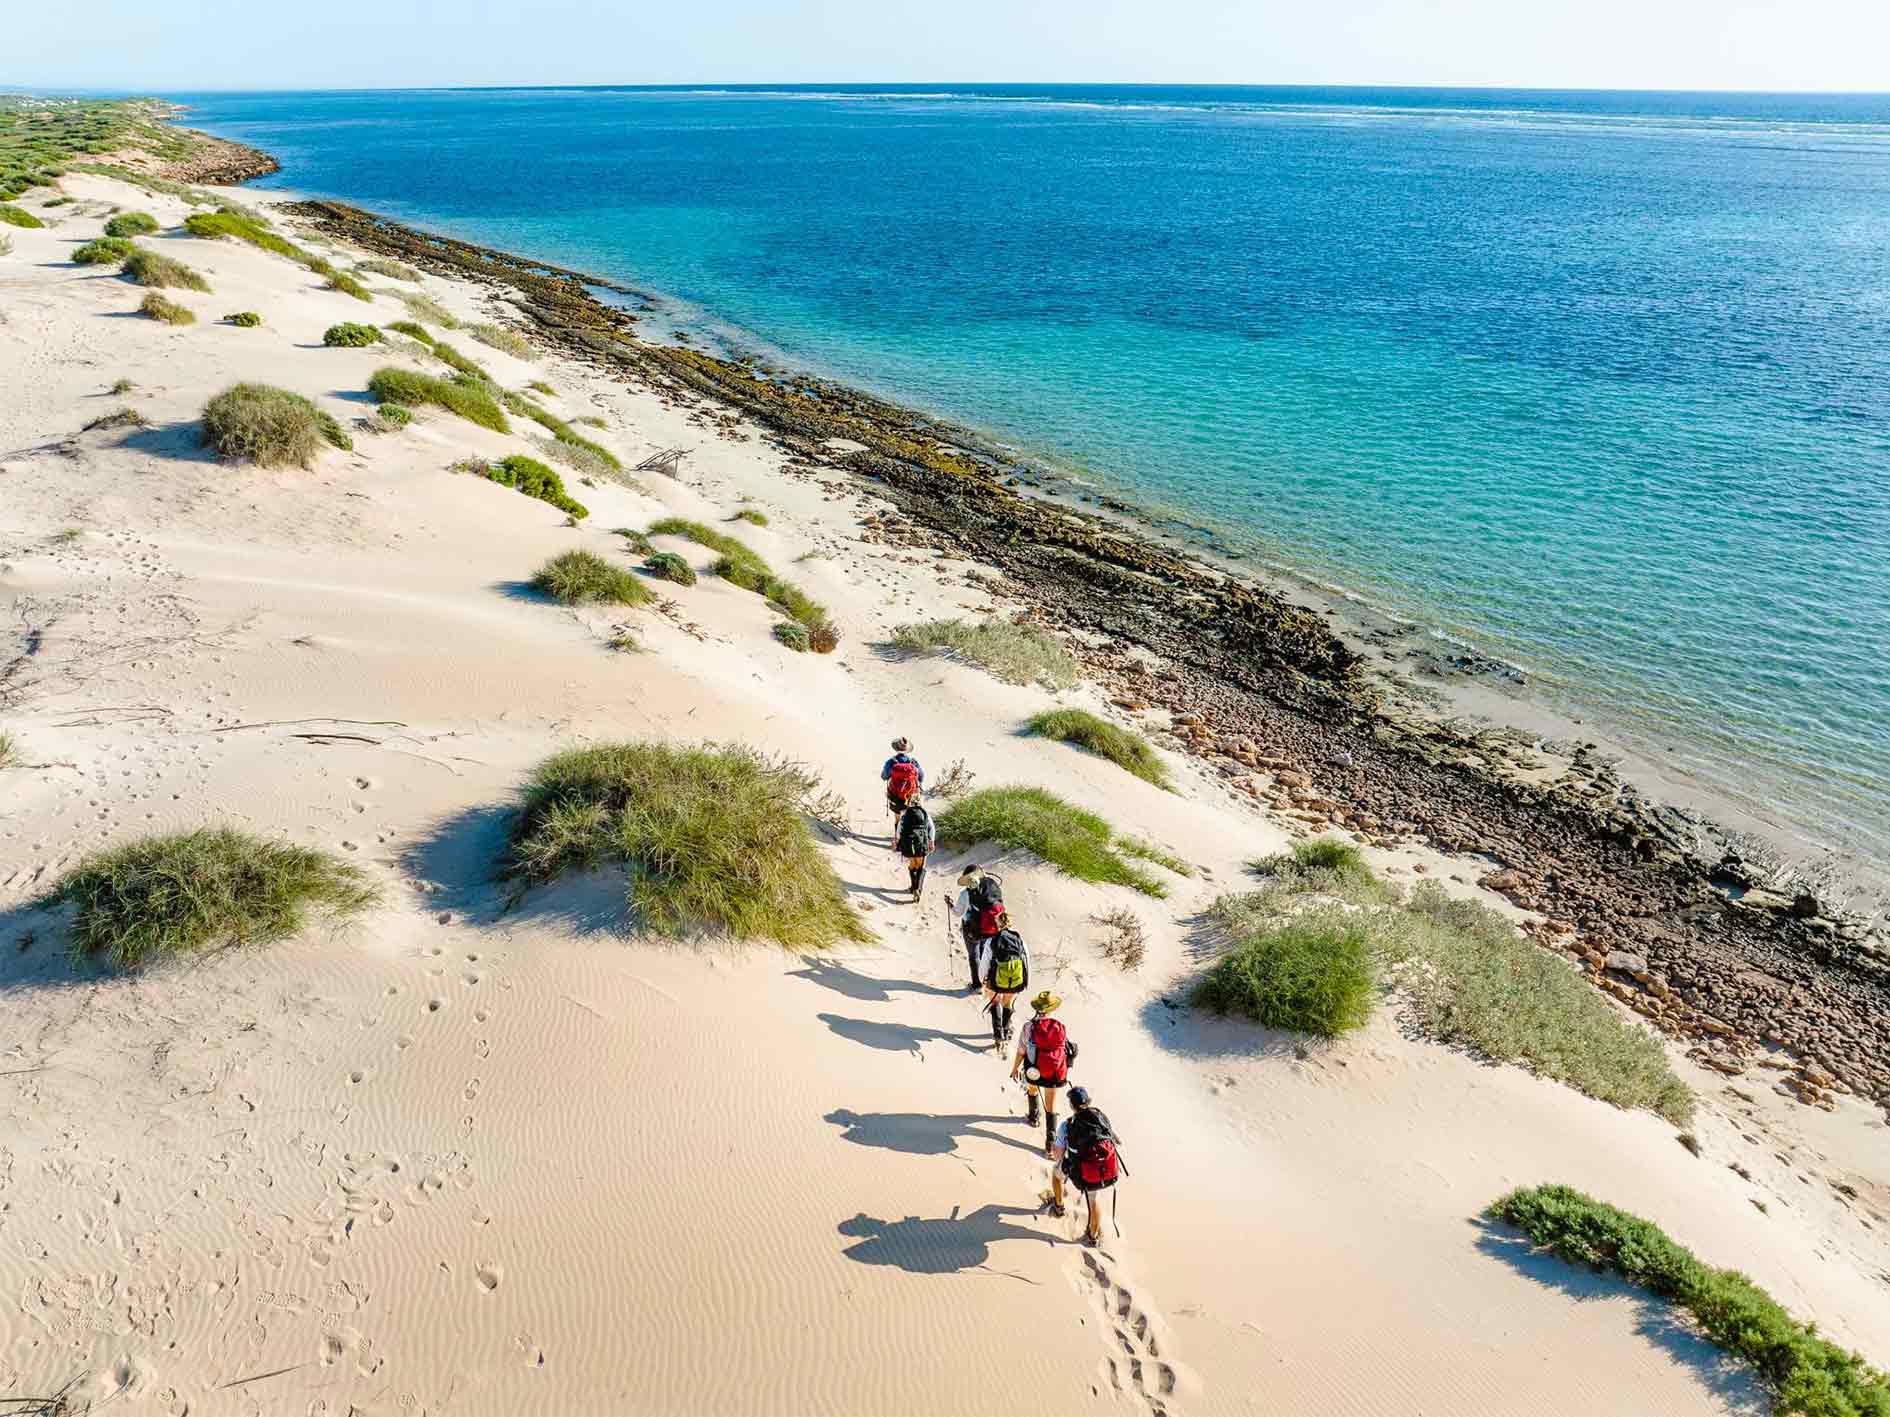 Group of people trekking along the coast, next to the clear turquoise waters of Ningaloo Reef